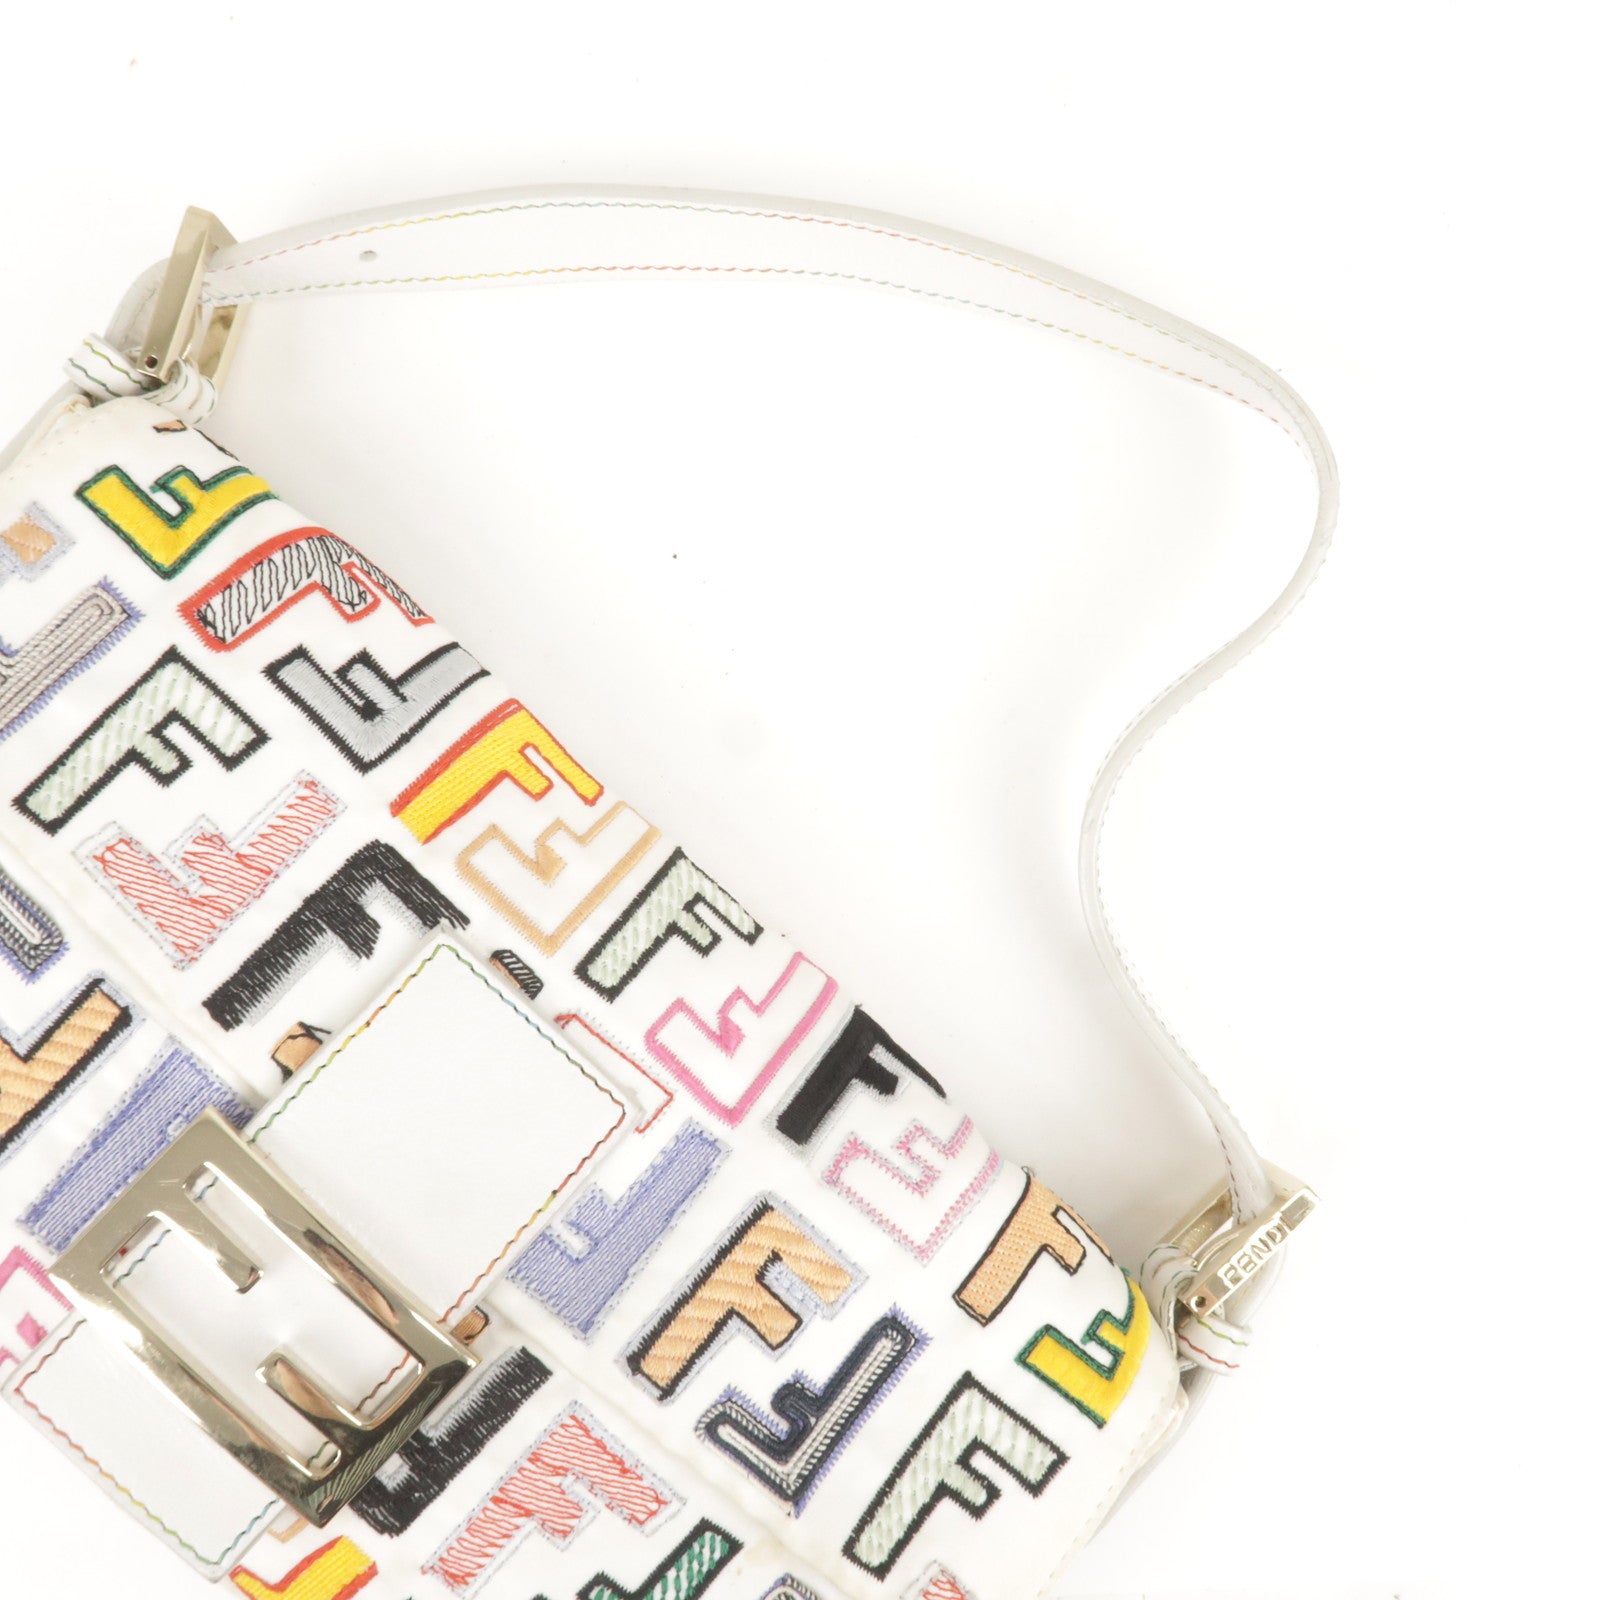 FENDI-Zucca-Mamma-Baguette-Embroidery-Bag-Multi-Color-8BR600 –  dct-ep_vintage luxury Store